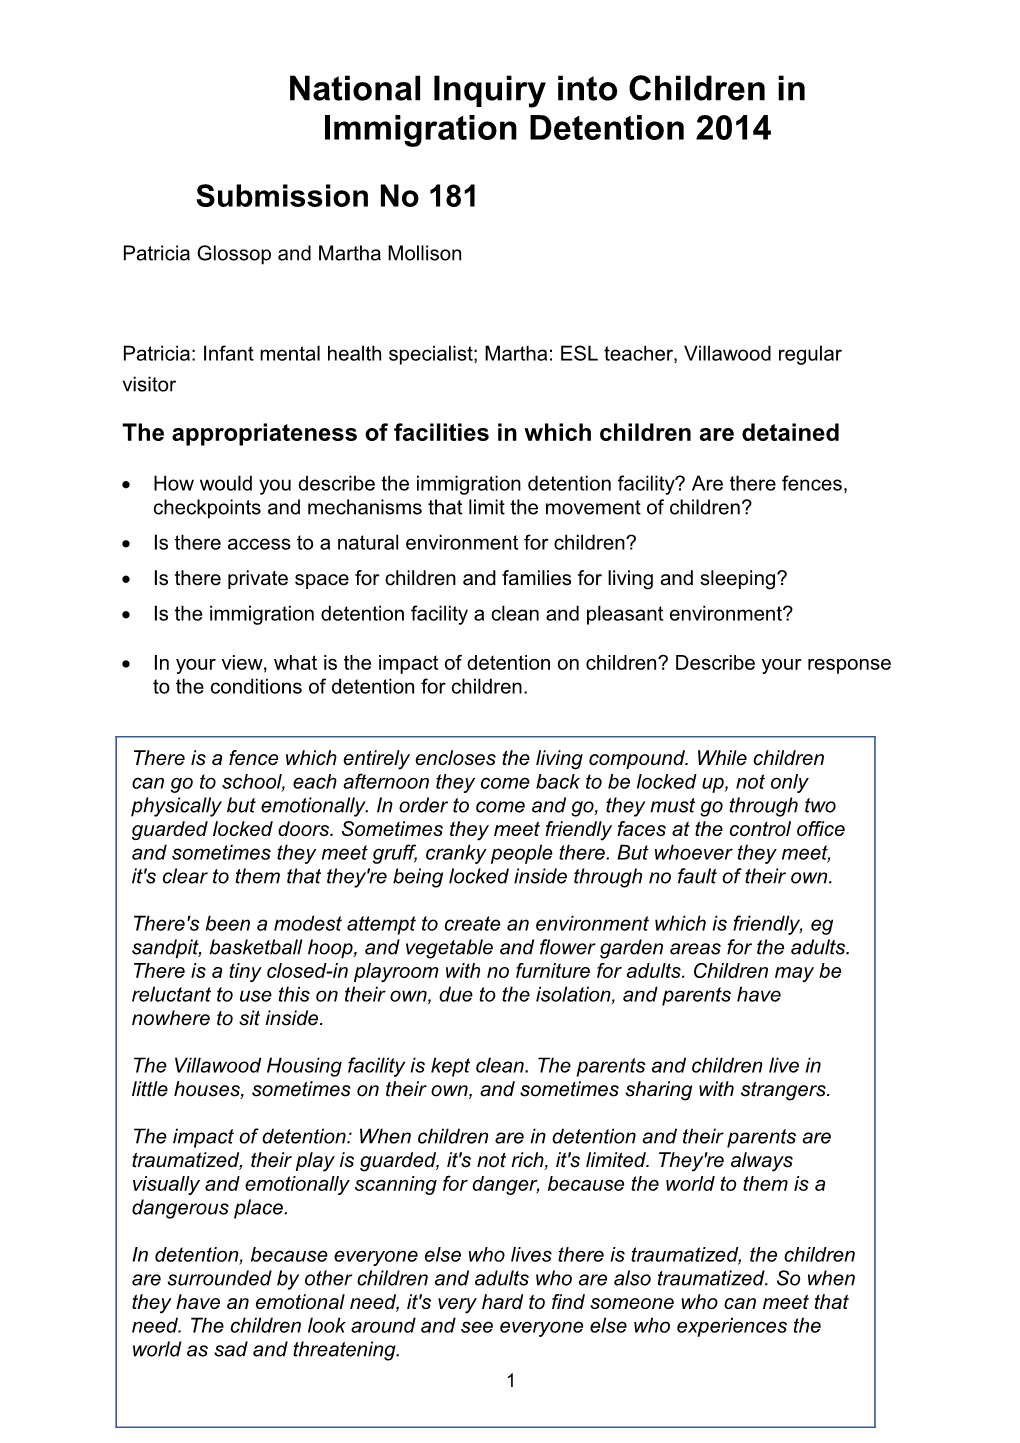 National Inquiry Into Children in Immigration Detention 2014 s1